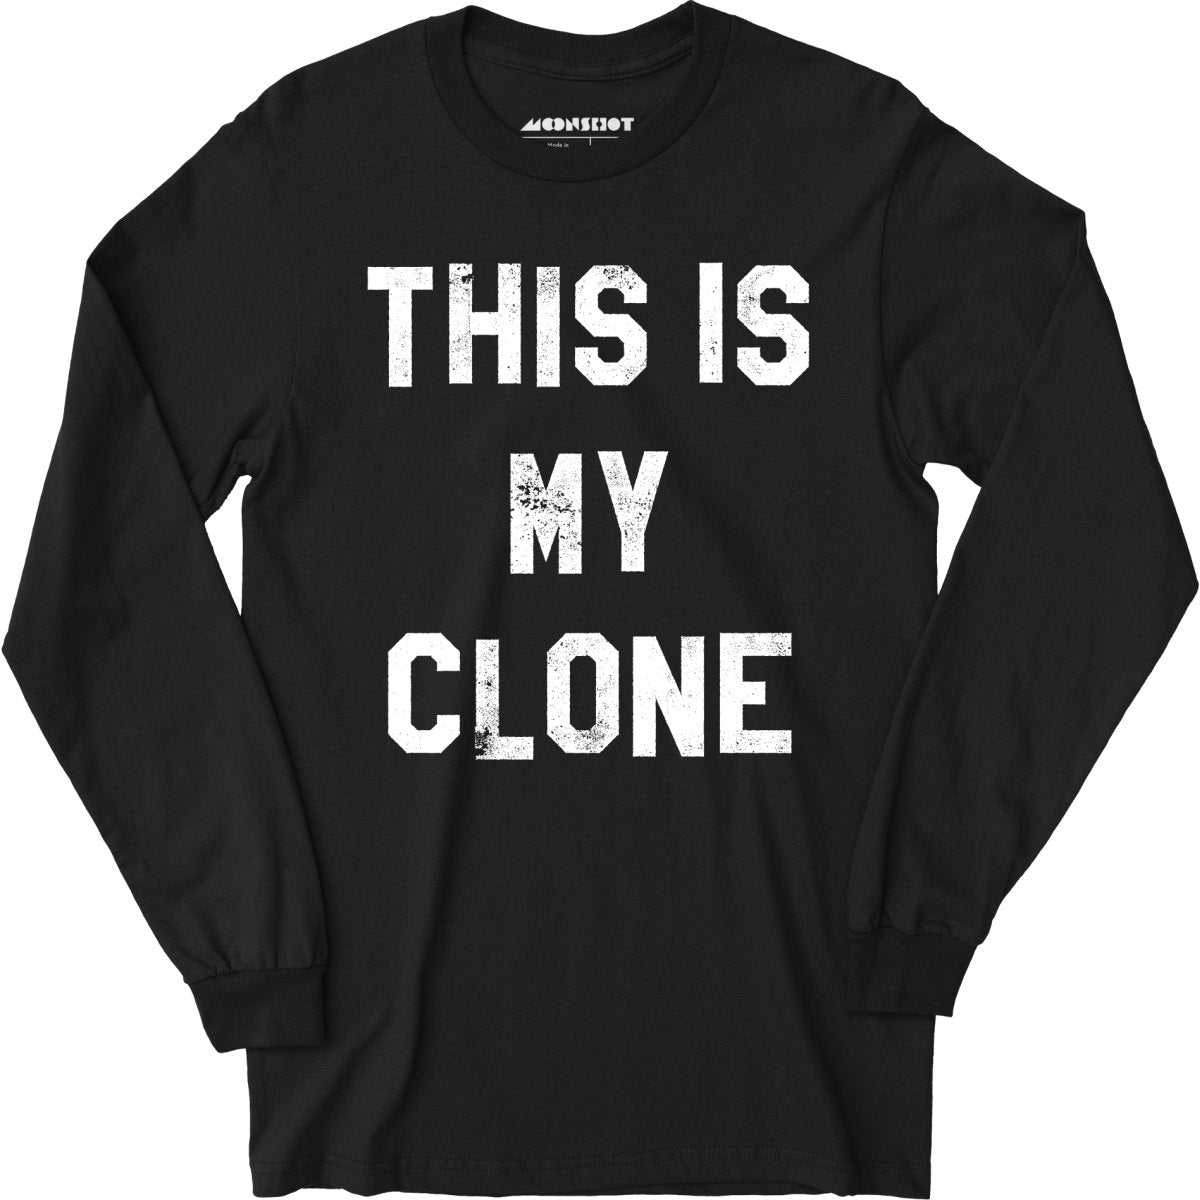 This is My Clone - Long Sleeve T-Shirt